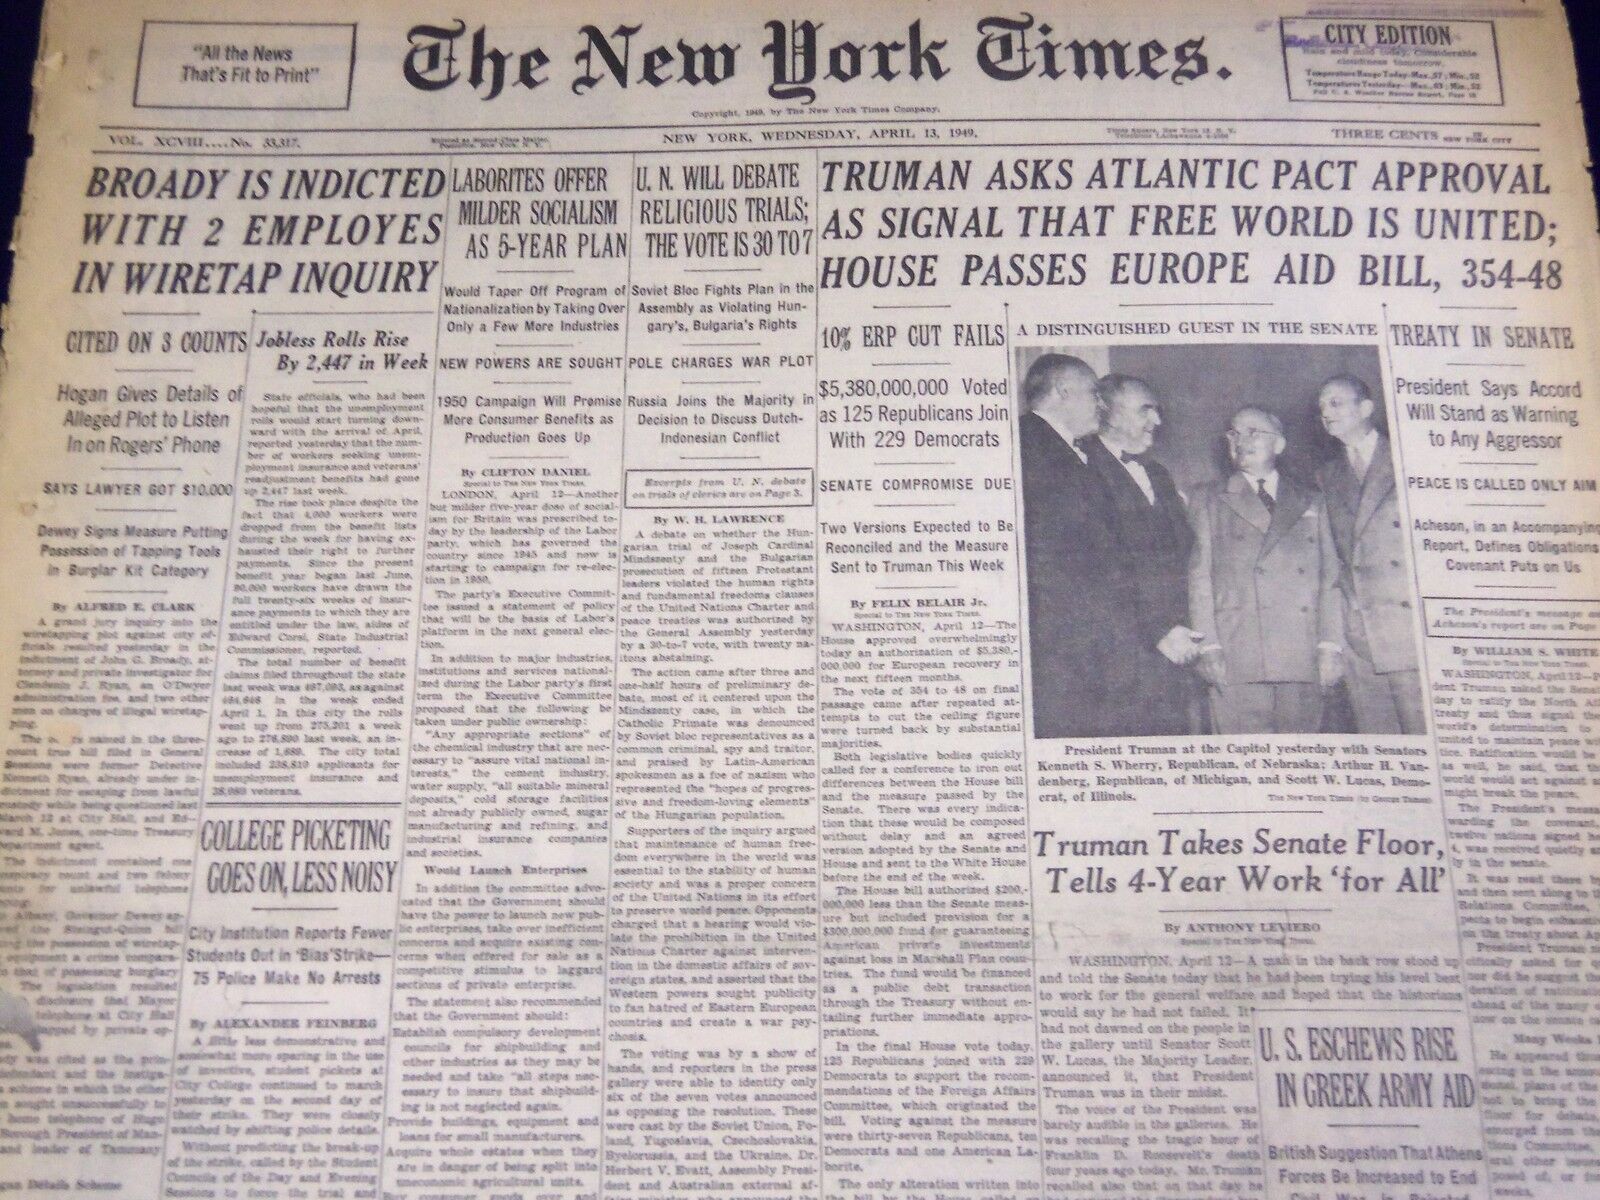 1949 APRIL 13 NEW YORK TIMES - BROADY INDICTED IN WIRE TAP INQUIRY - NT 2657